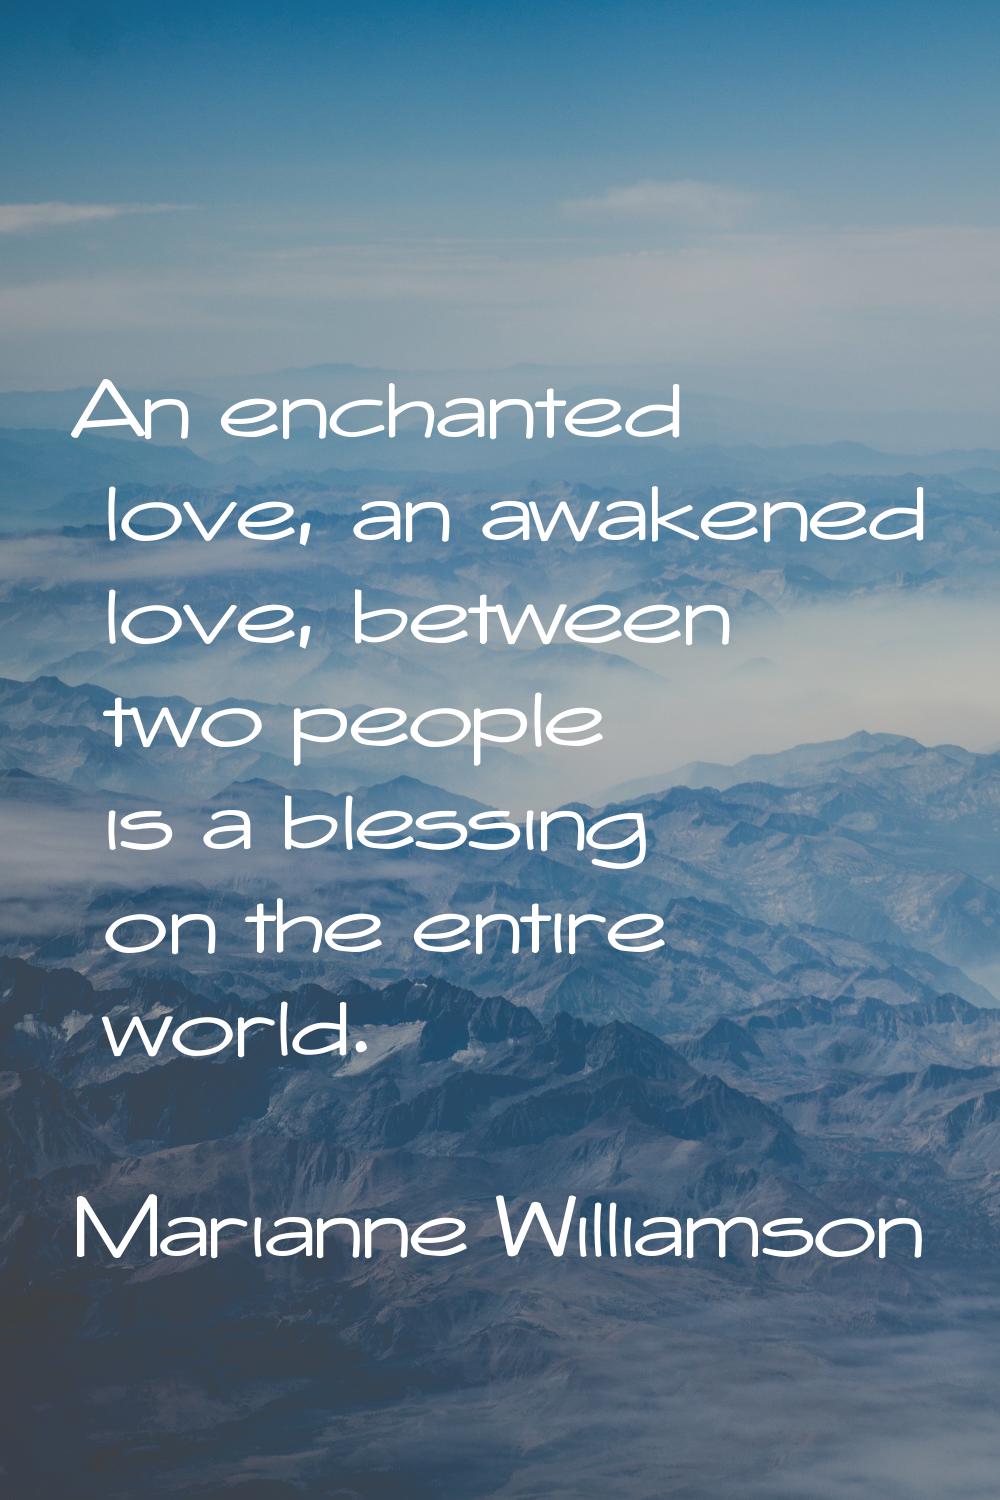 An enchanted love, an awakened love, between two people is a blessing on the entire world.